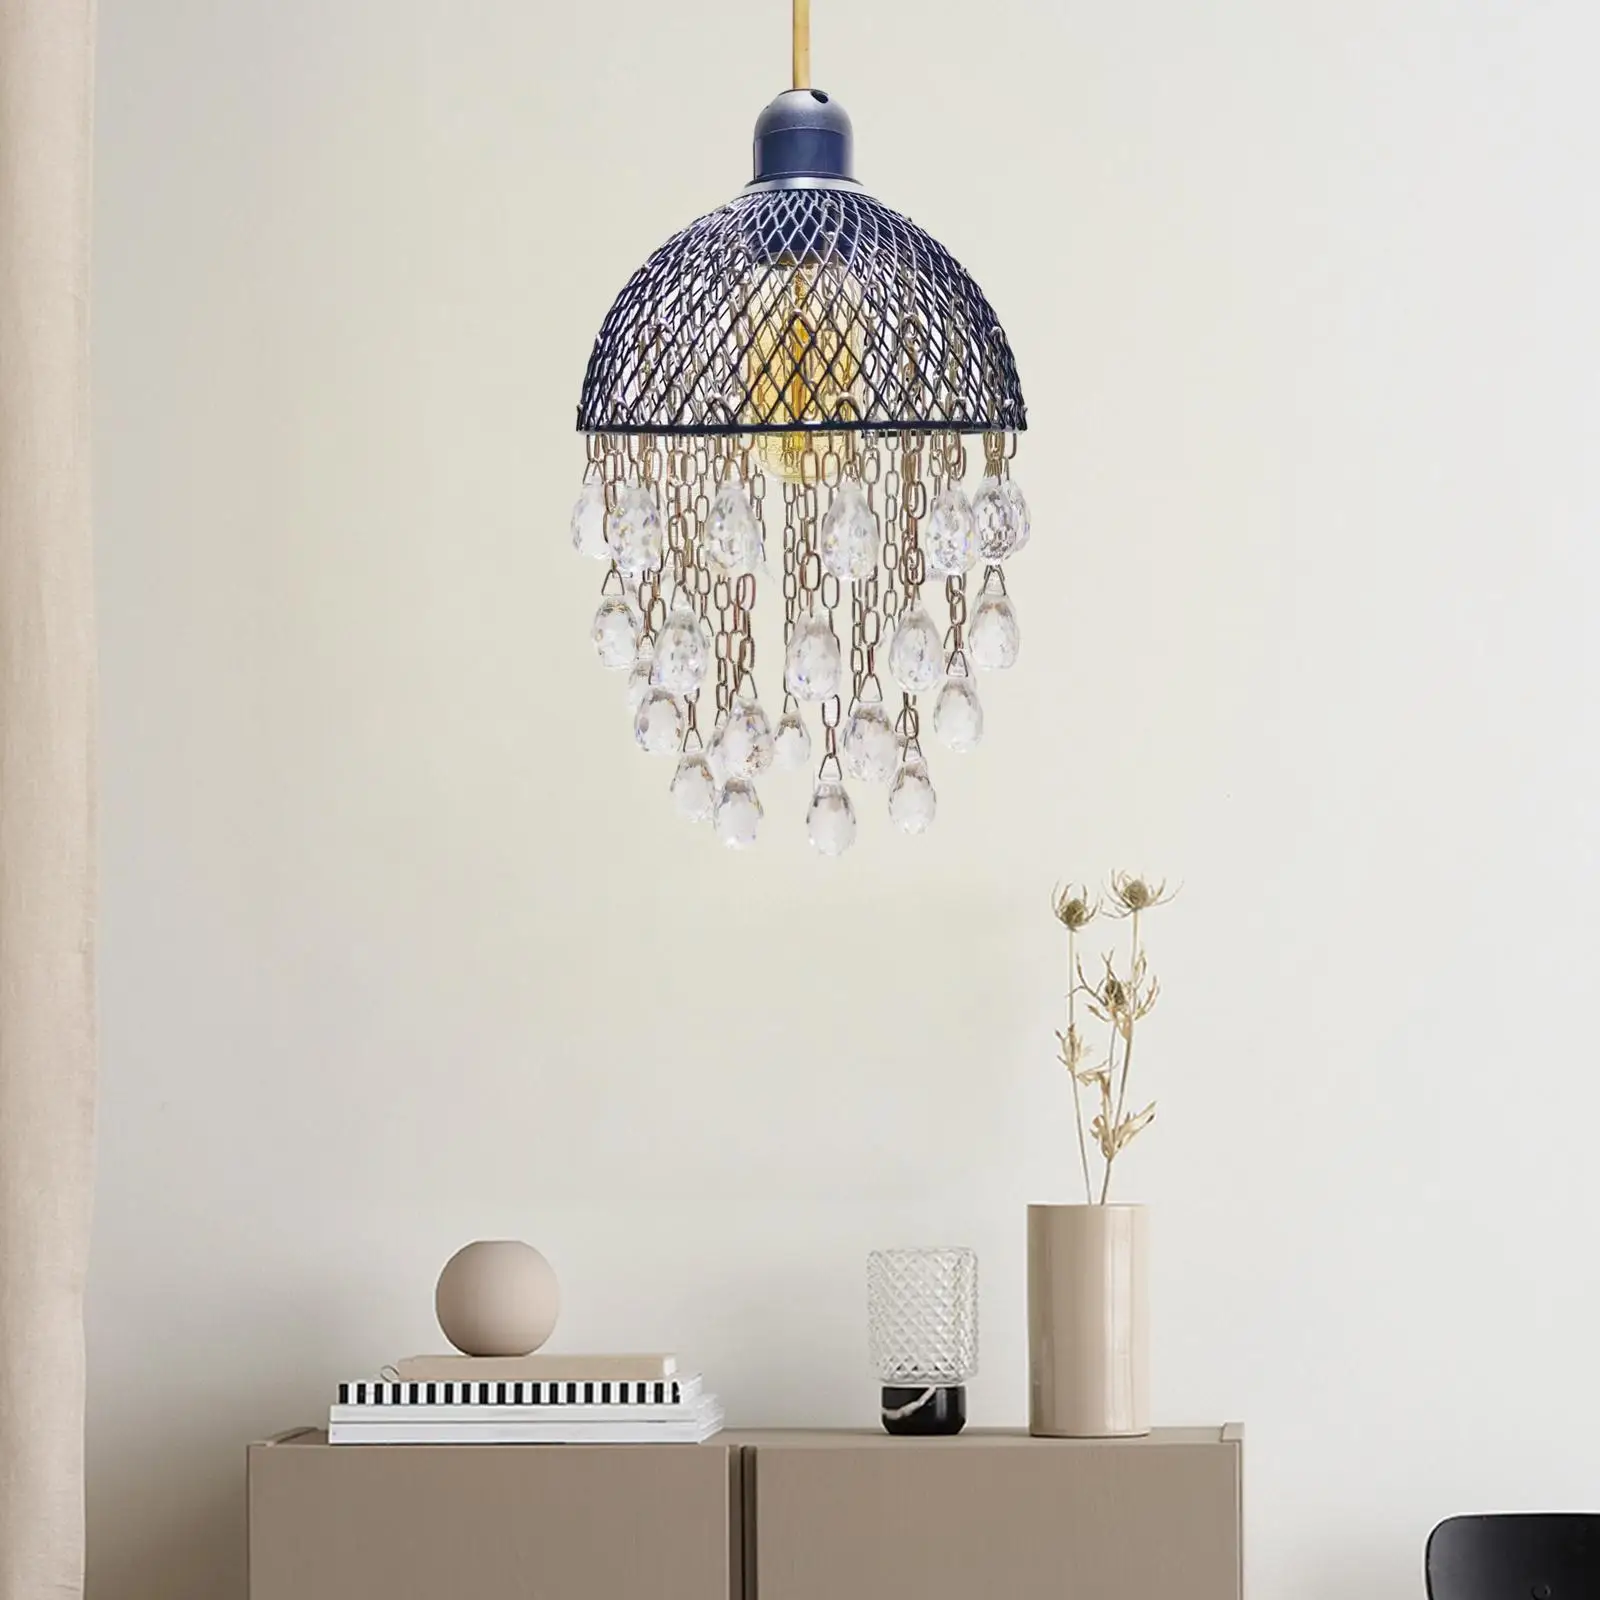 Beaded Lampshade Acrylic Chandelier Shade Modern Beaded Hanging Chandelier Shade for Bedroom Hallways Living Rooms Wedding Party